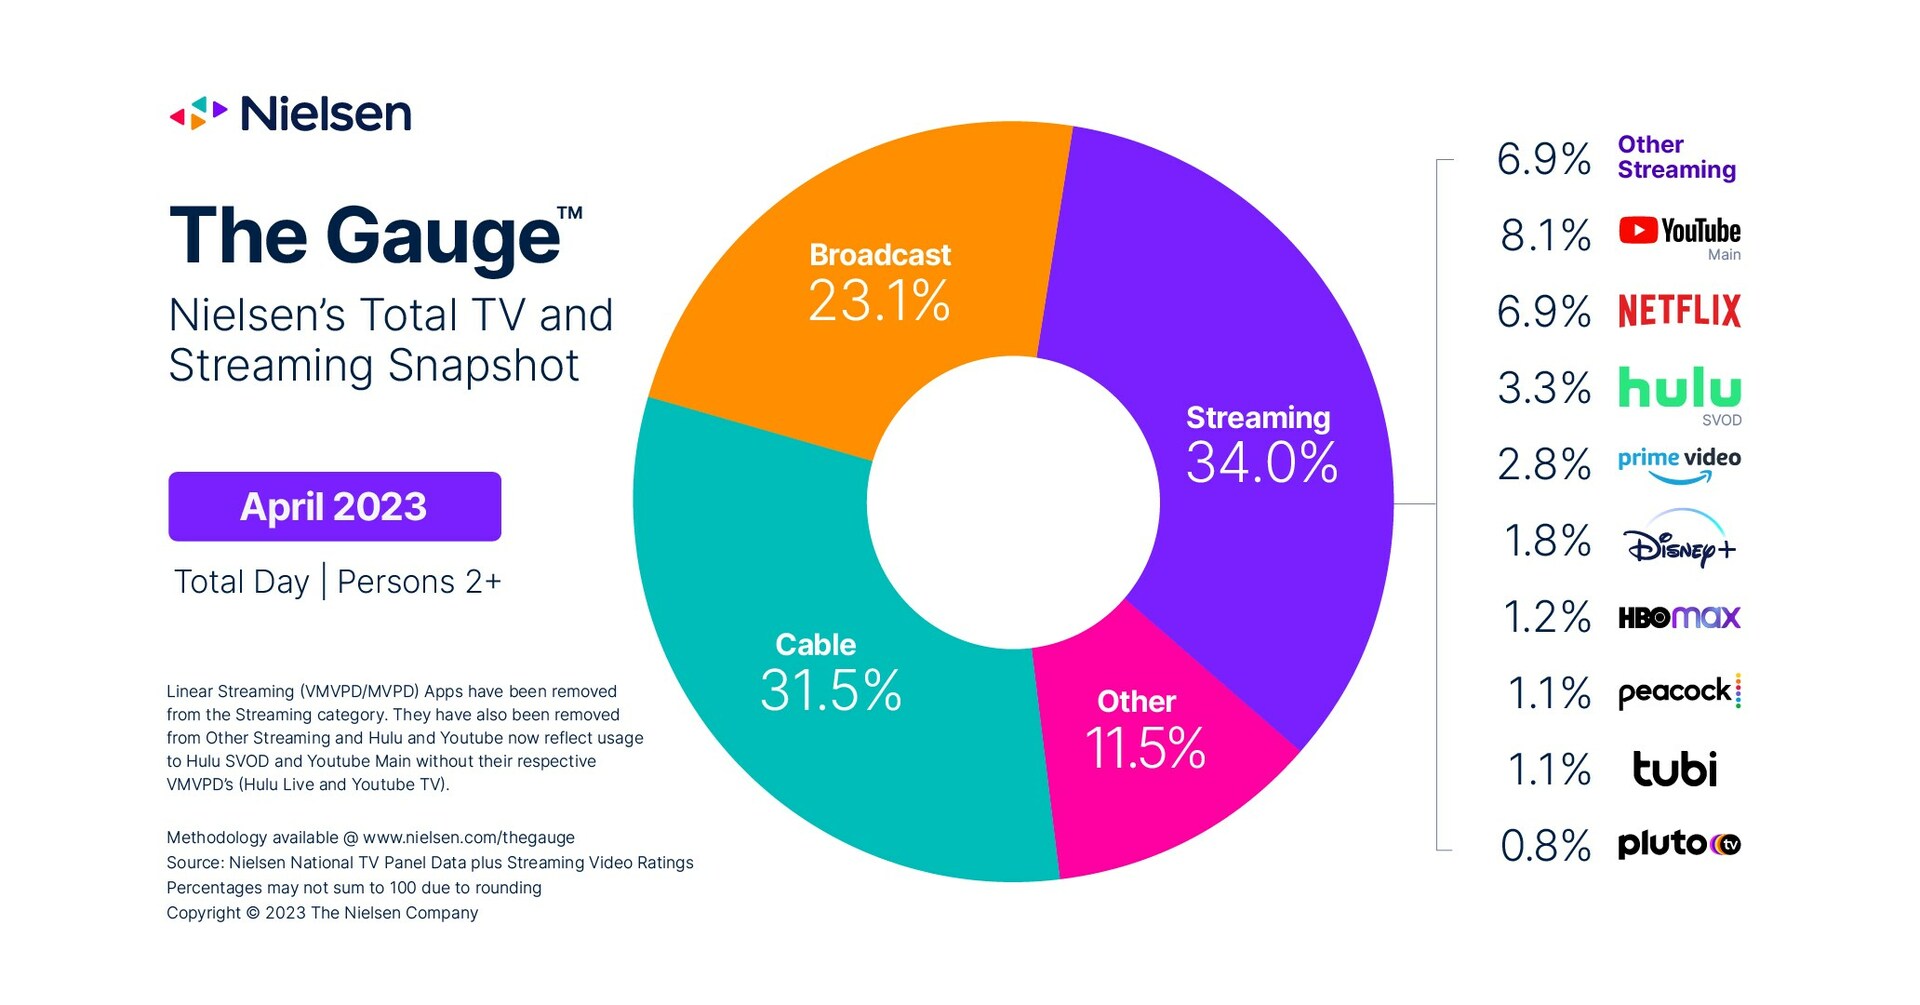 News Consumption in April Boosts Cable's Share of TV, according to